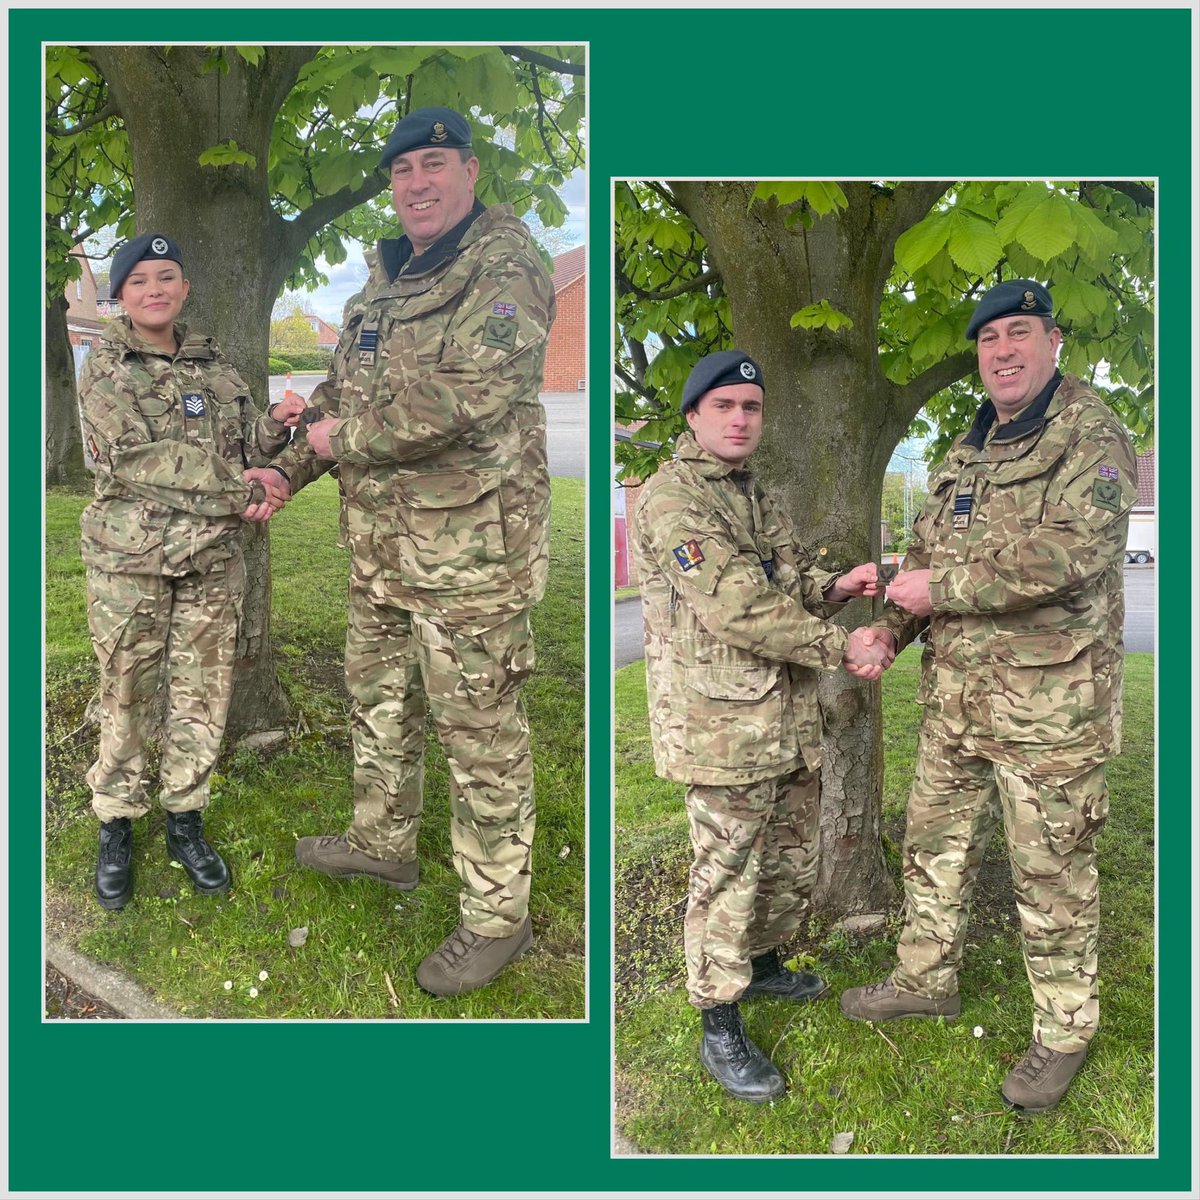 WING NEWS - Recently FS Woodhead of 23 Sqn and CWO Binns of 208 Sqn were presented with their SATT badges! A big well done! 

Original images via NorthSATT.